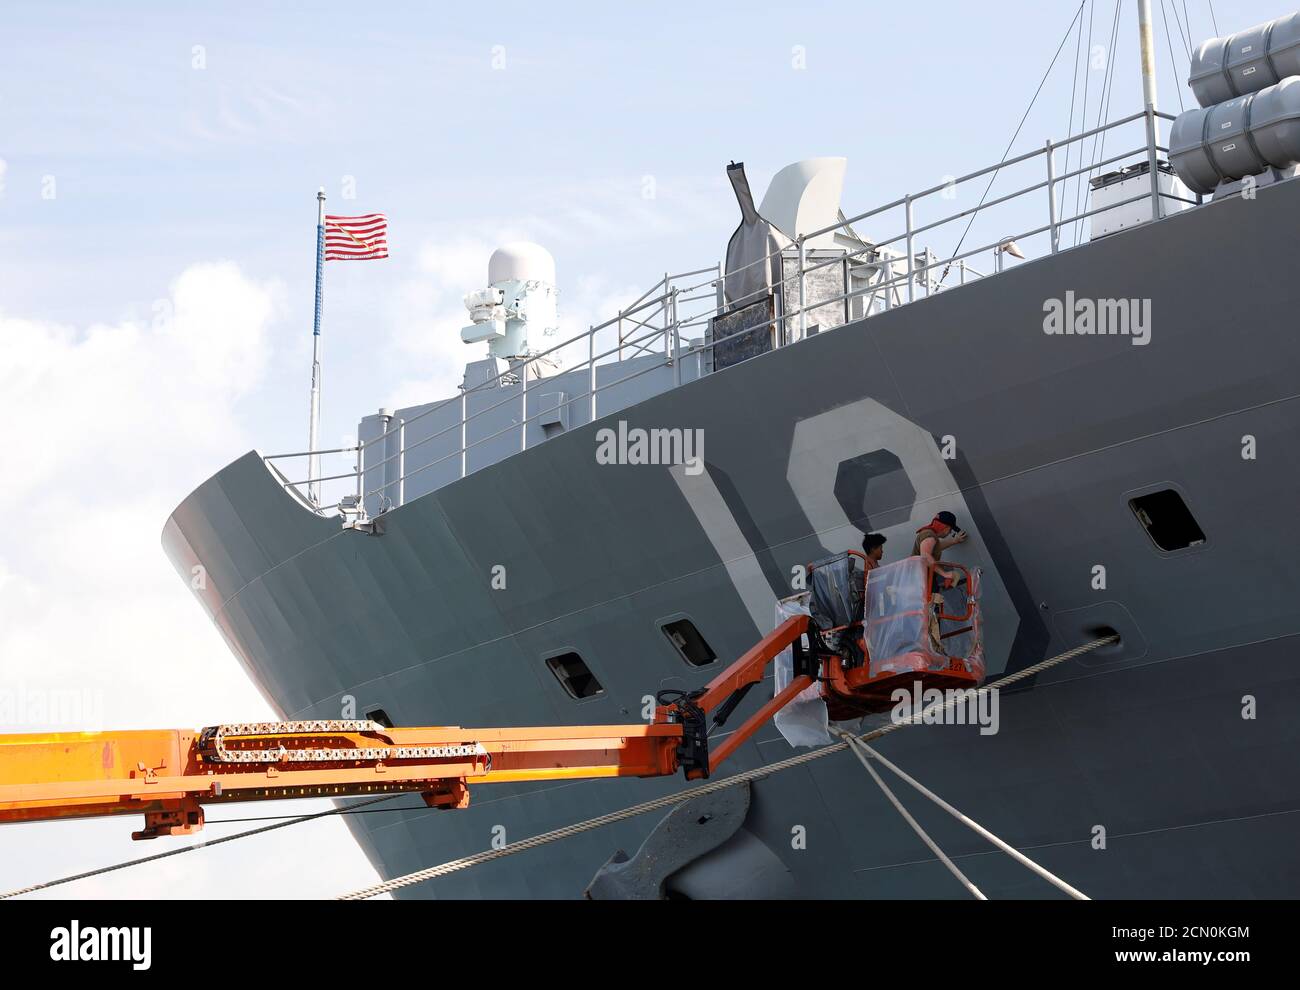 Servicemen perform maintenance work on the hull of the USS Blue Ridge (LCC 19), flagship of the U.S. Navy's 7th Fleet, at Changi Naval Base in Singapore May 9, 2019. REUTERS/Edgar Su Stock Photo